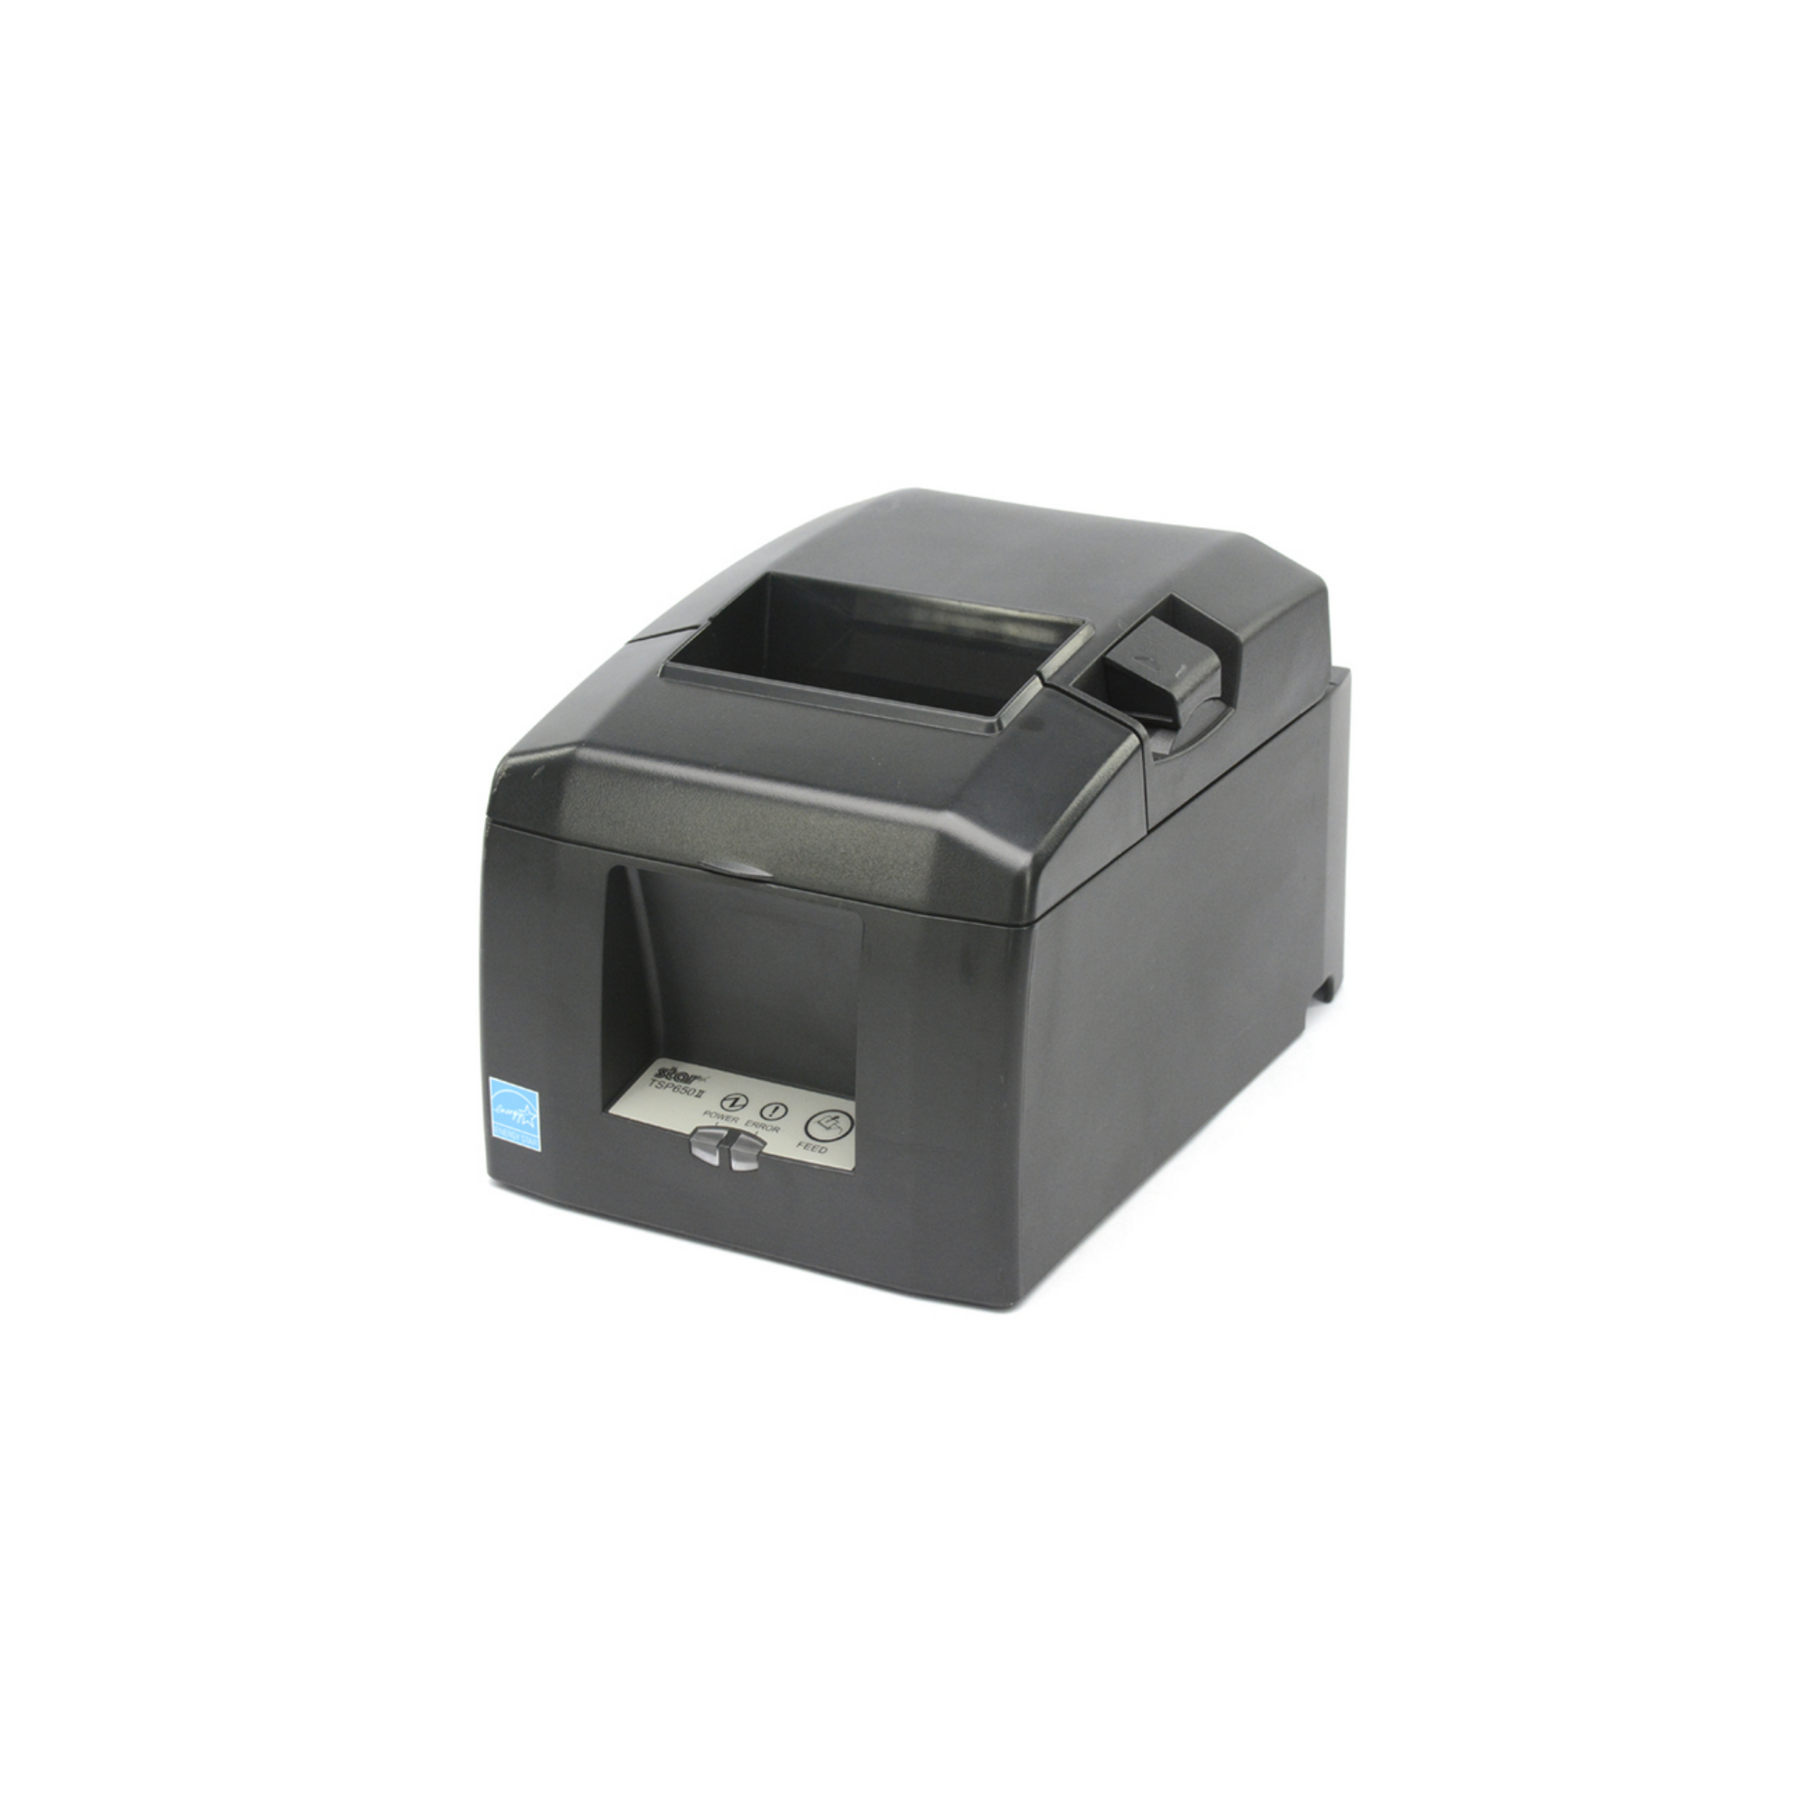 Star Micronics Thermal Printer, TSP654IIBI2-24 US, TSP650II, Thermal, Cutter, Bluetooth IOS Ext PS Included